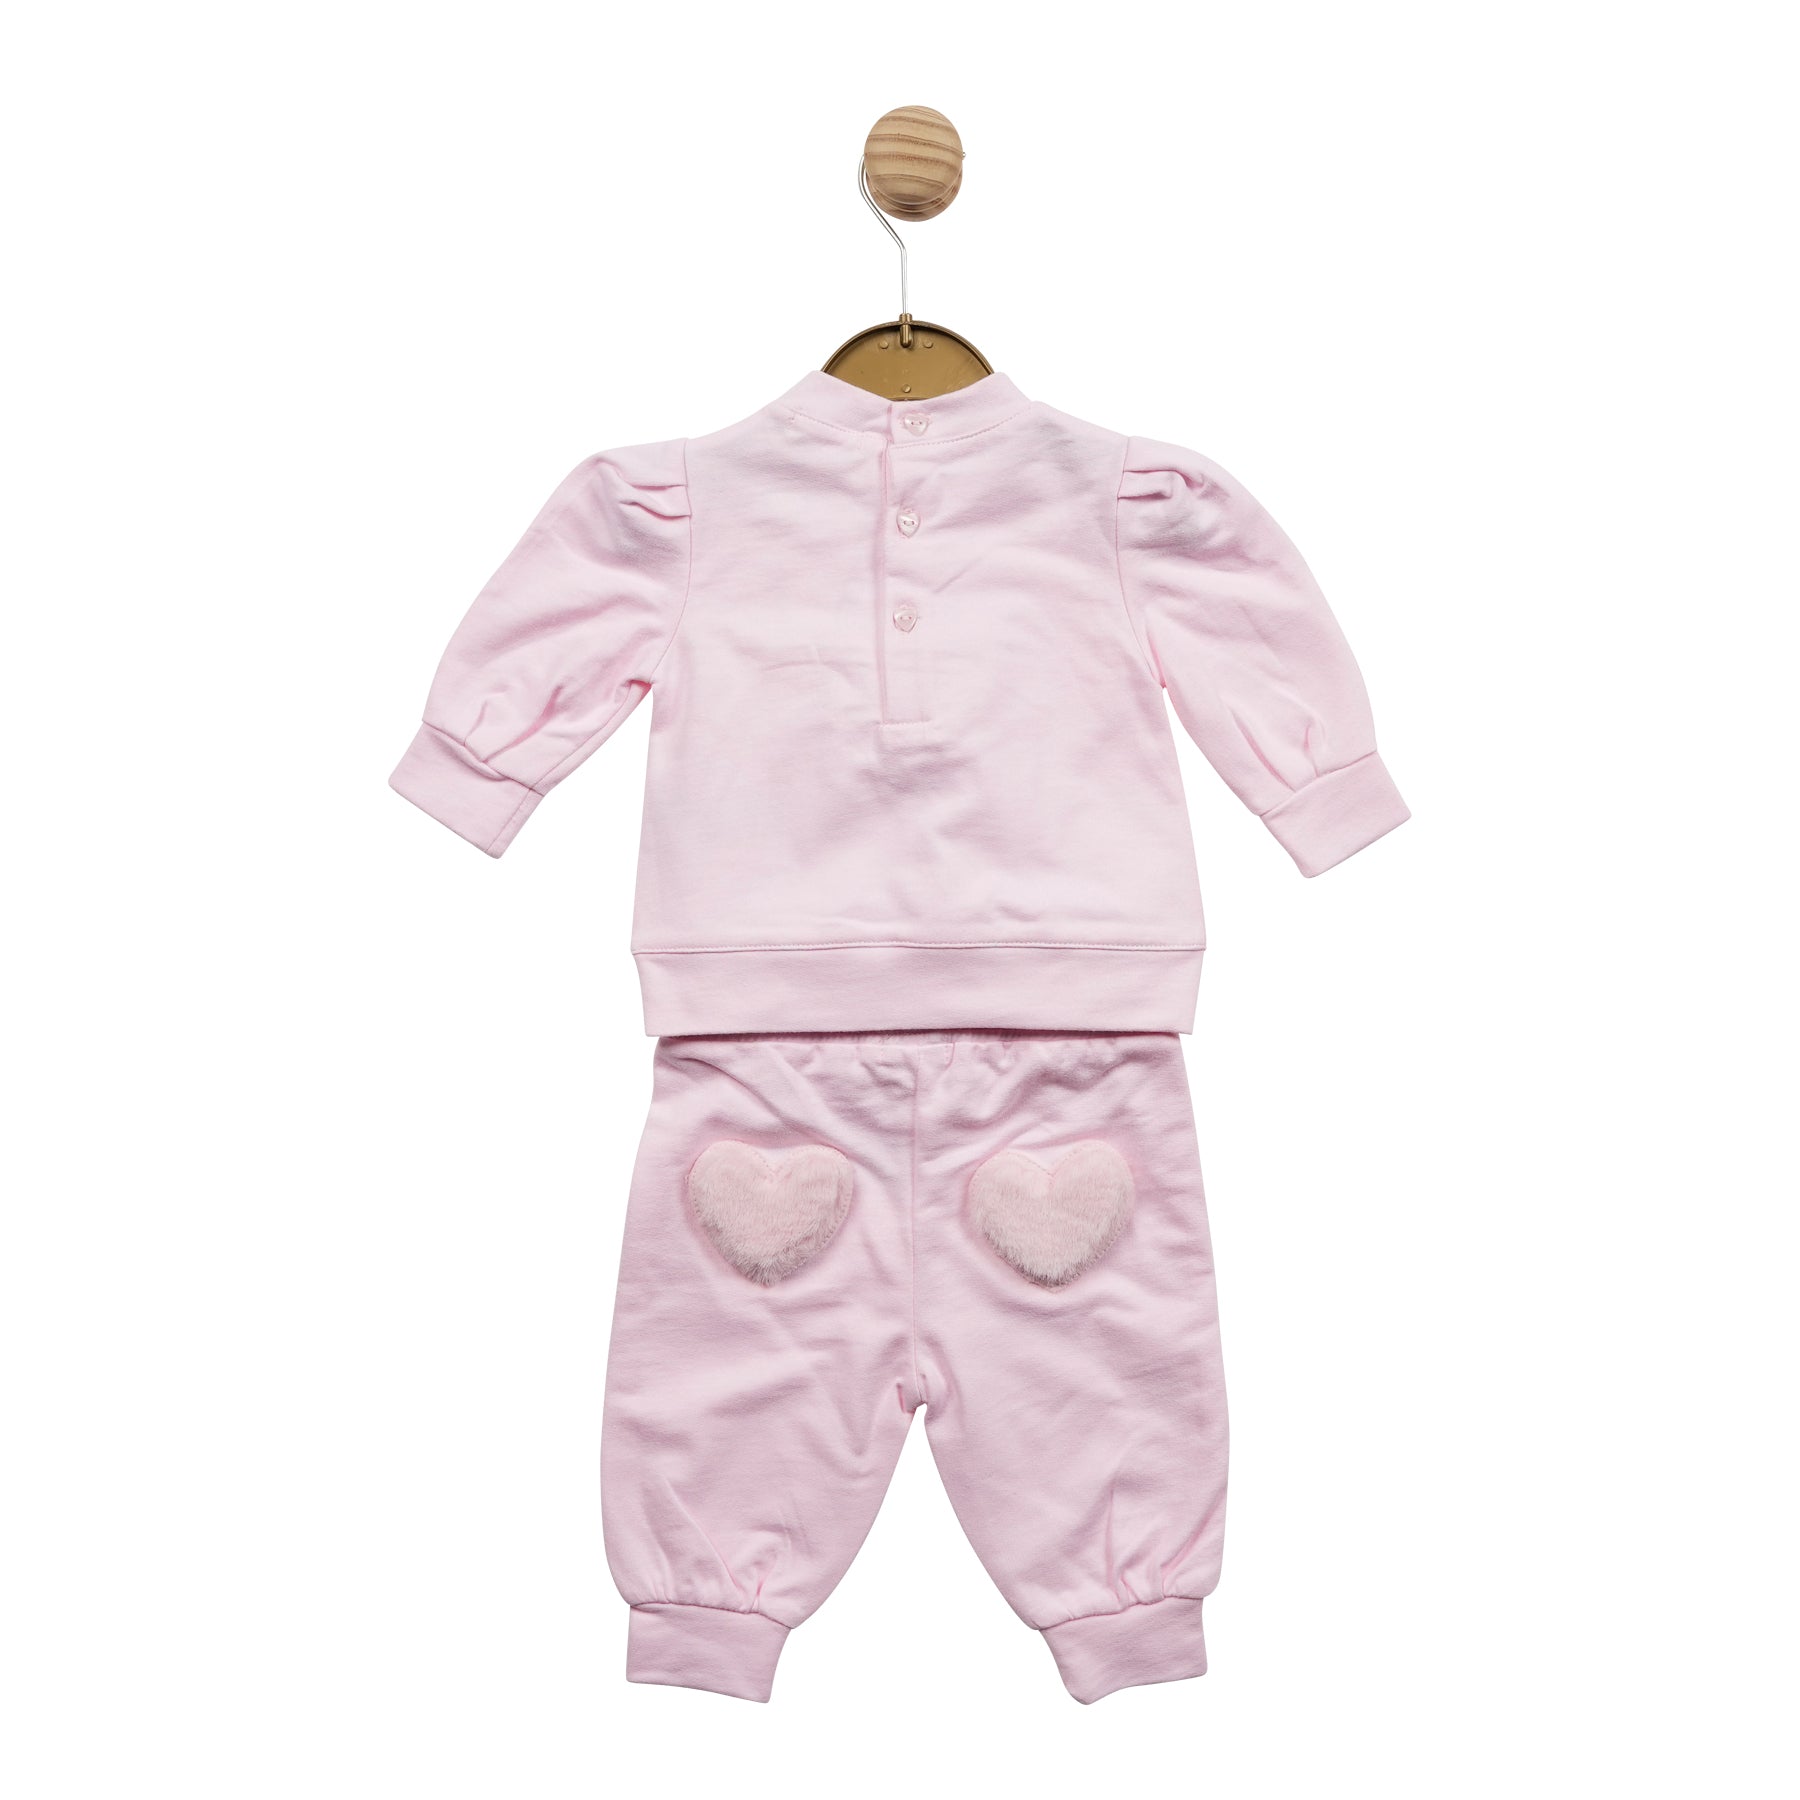 Mintini Baby, girls pink two piece jogger set, set consists of a long sleeve sweatshirt with heart shape fur detail and diamanté sequins, trousers have heart shape detail on the back, available in sizes 3 month up to 24 month